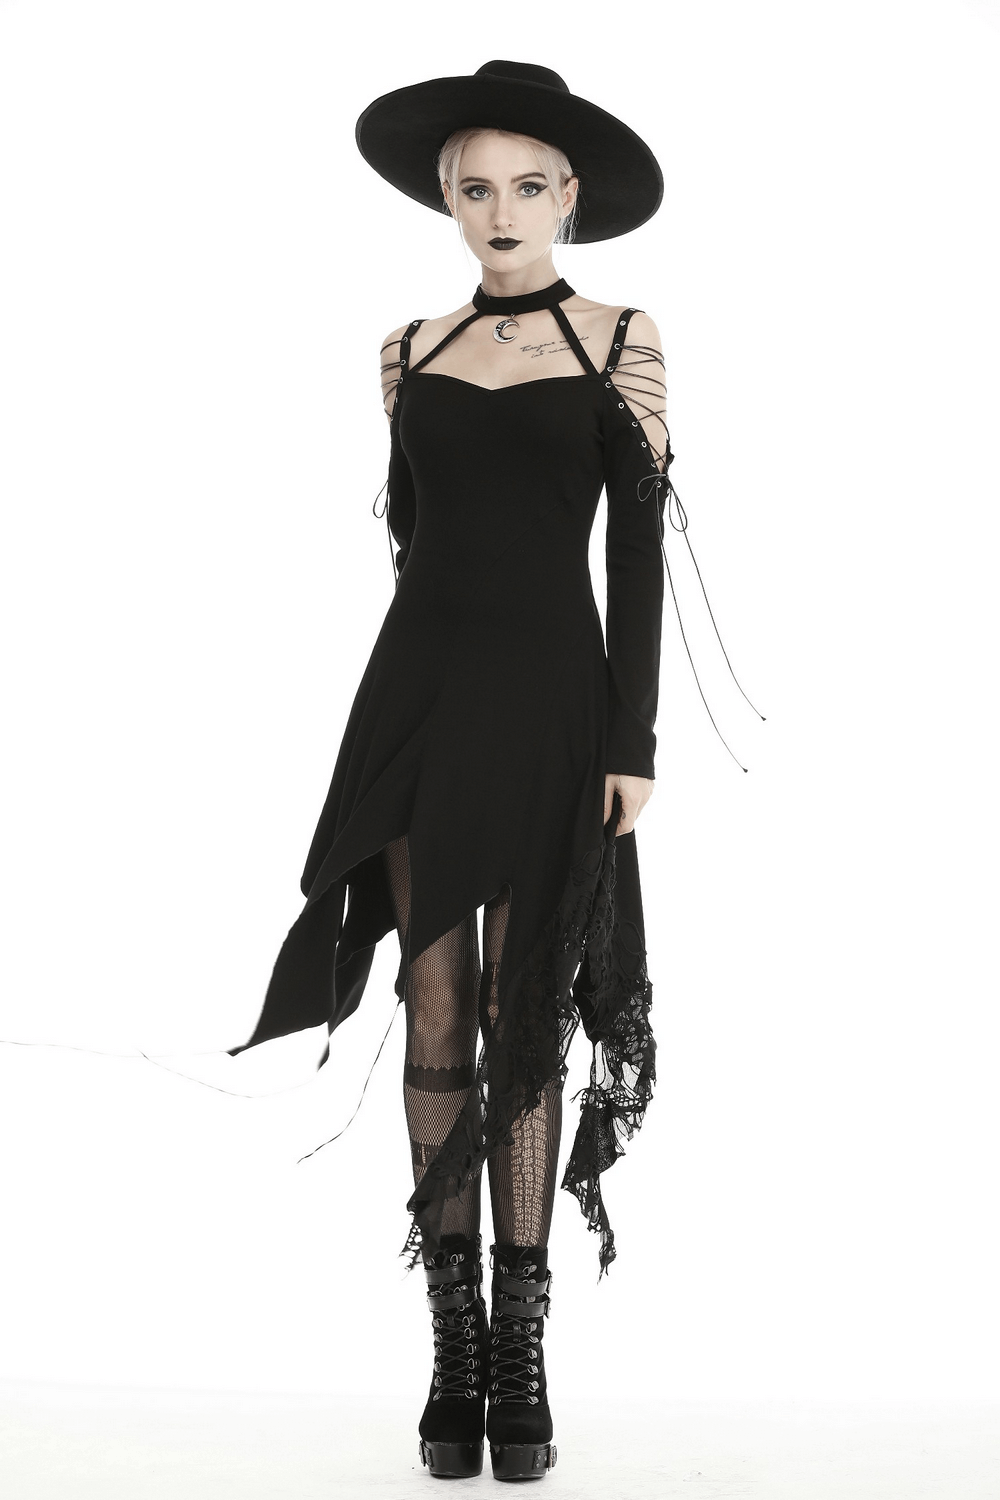 Black Off-Shoulder Ripped Witchy Punk Gothic Dress with Choker